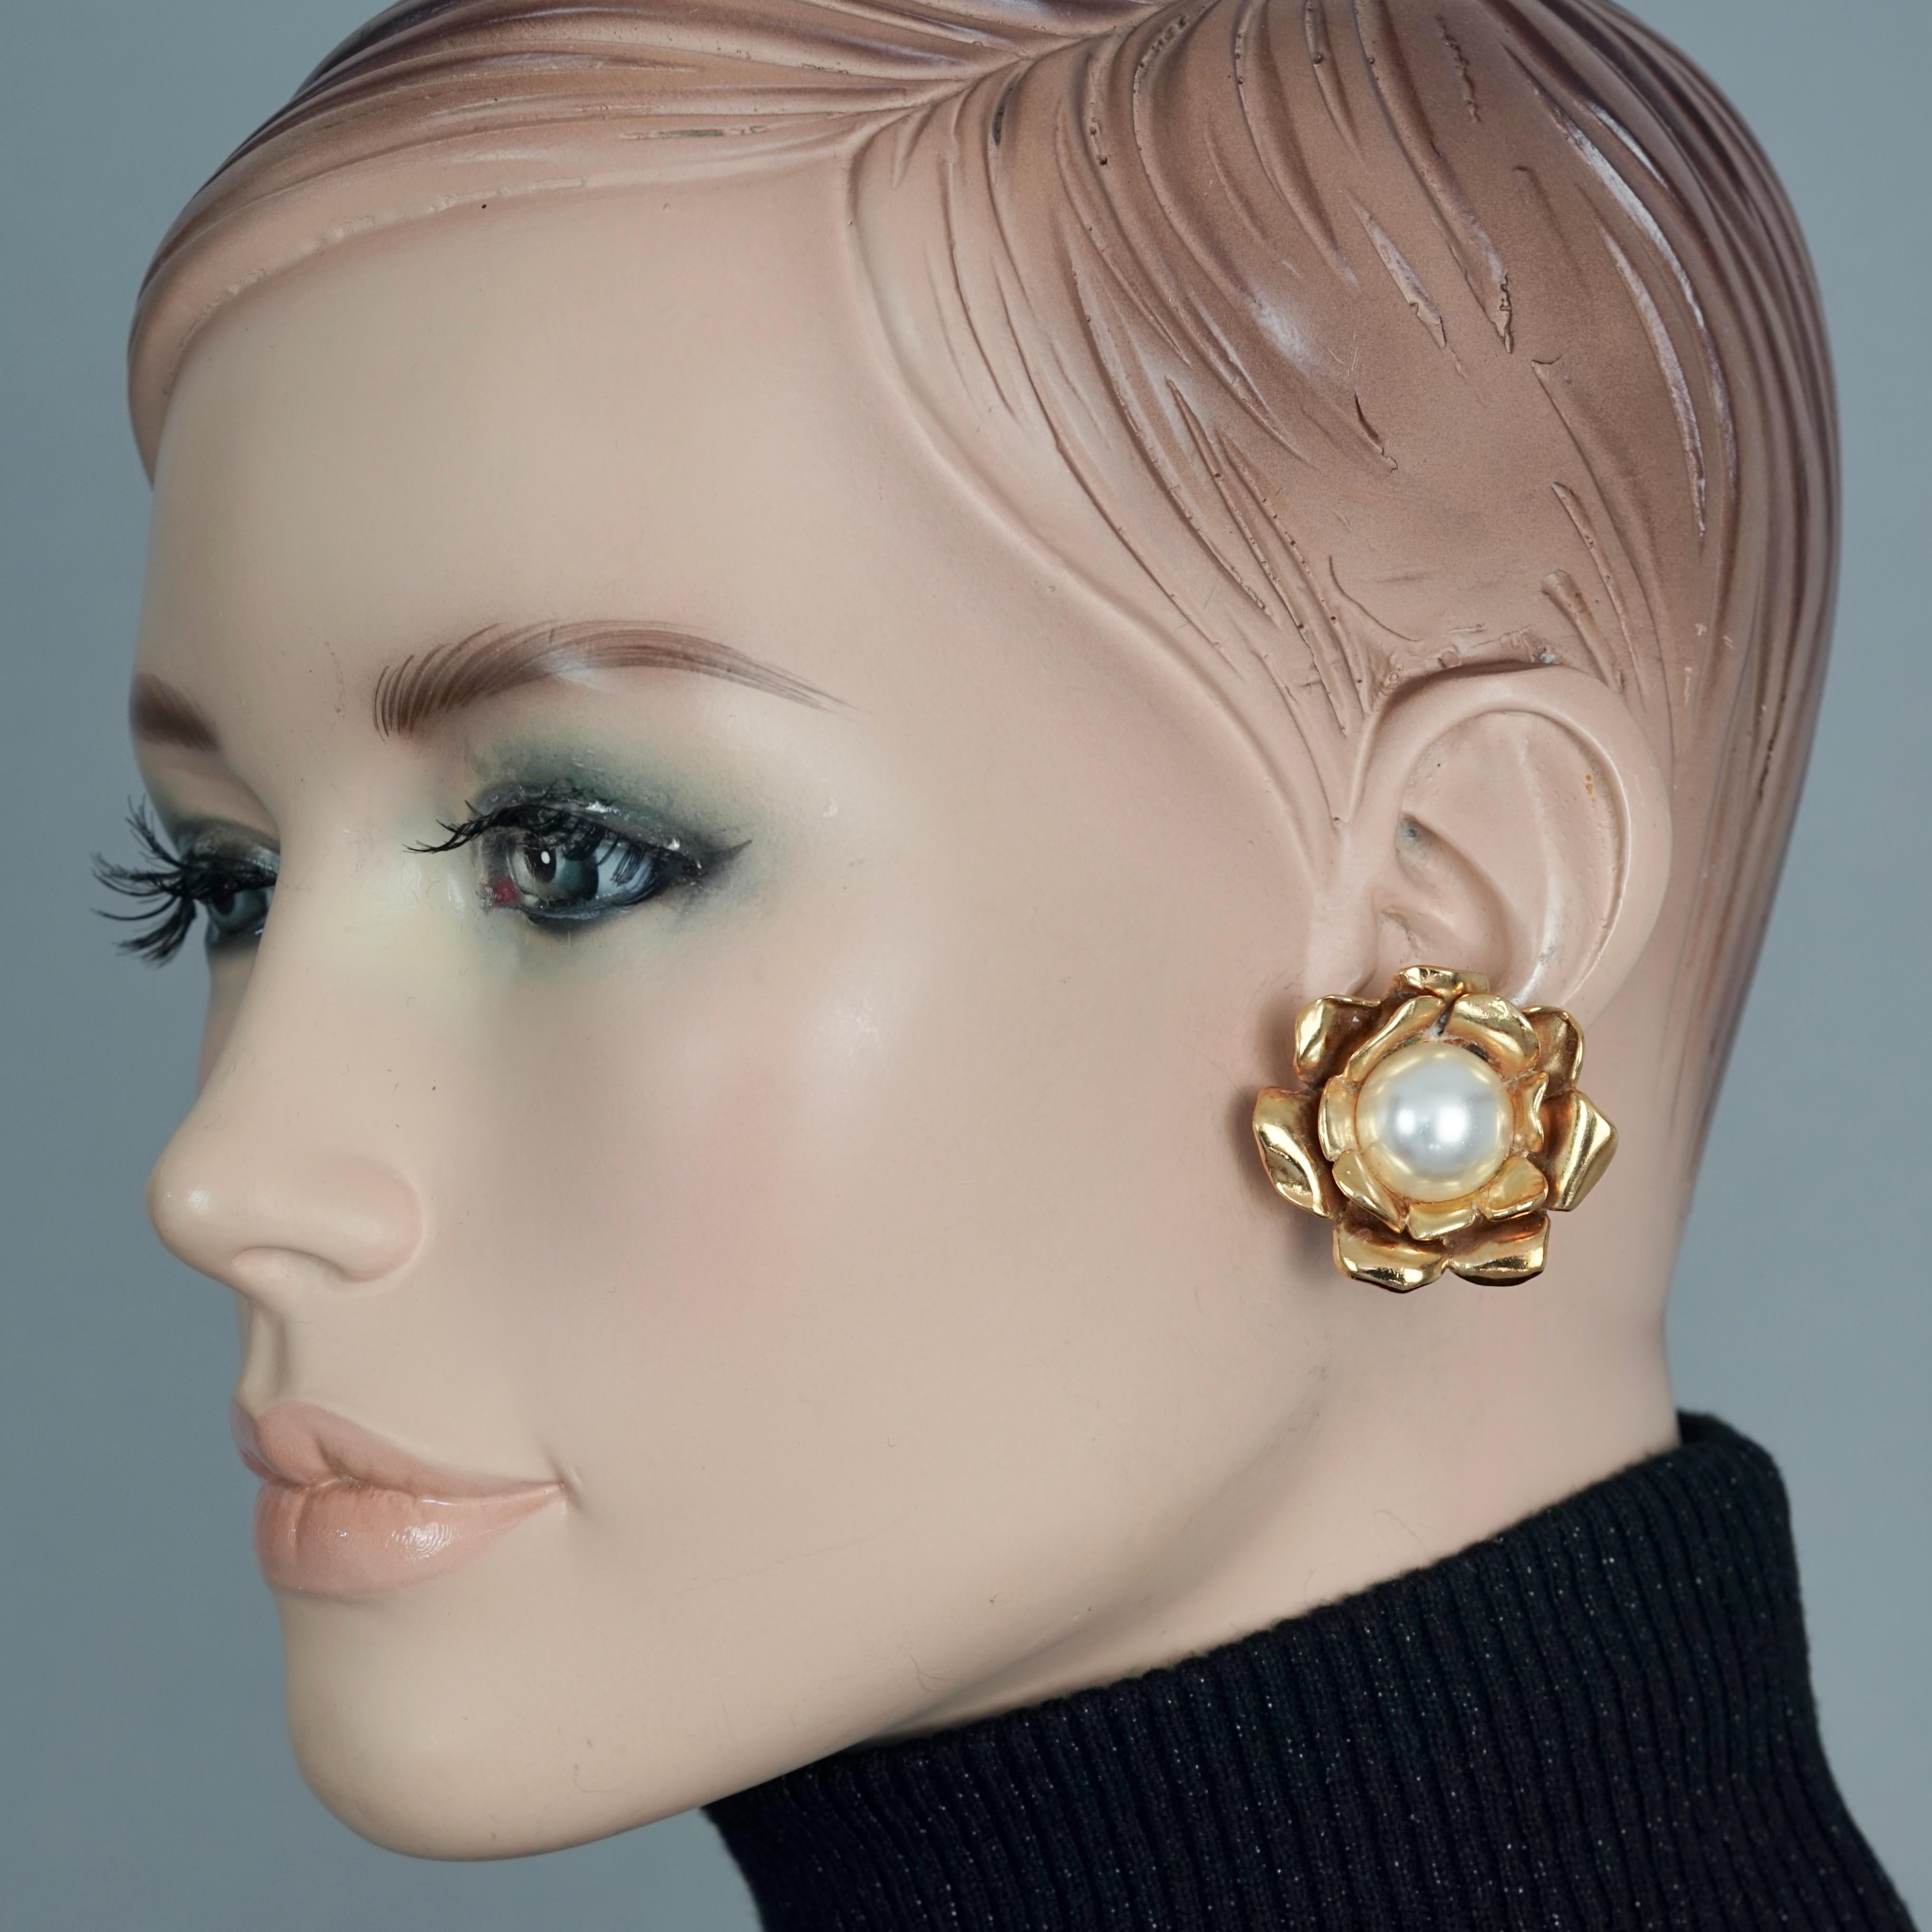 Vintage YVES SAINT LAURENT Ysl Gilt Flower Pearl Earrings

Measurements:
Height: 1.38 inches (3.5 cm)
Width: 1.38 inches (3.5 cm)
Weight per Earring: 13 grams

Features:
- 100% Authentic YVES SAINT LAURENT.
- Flower earrings with pearl cabochon at